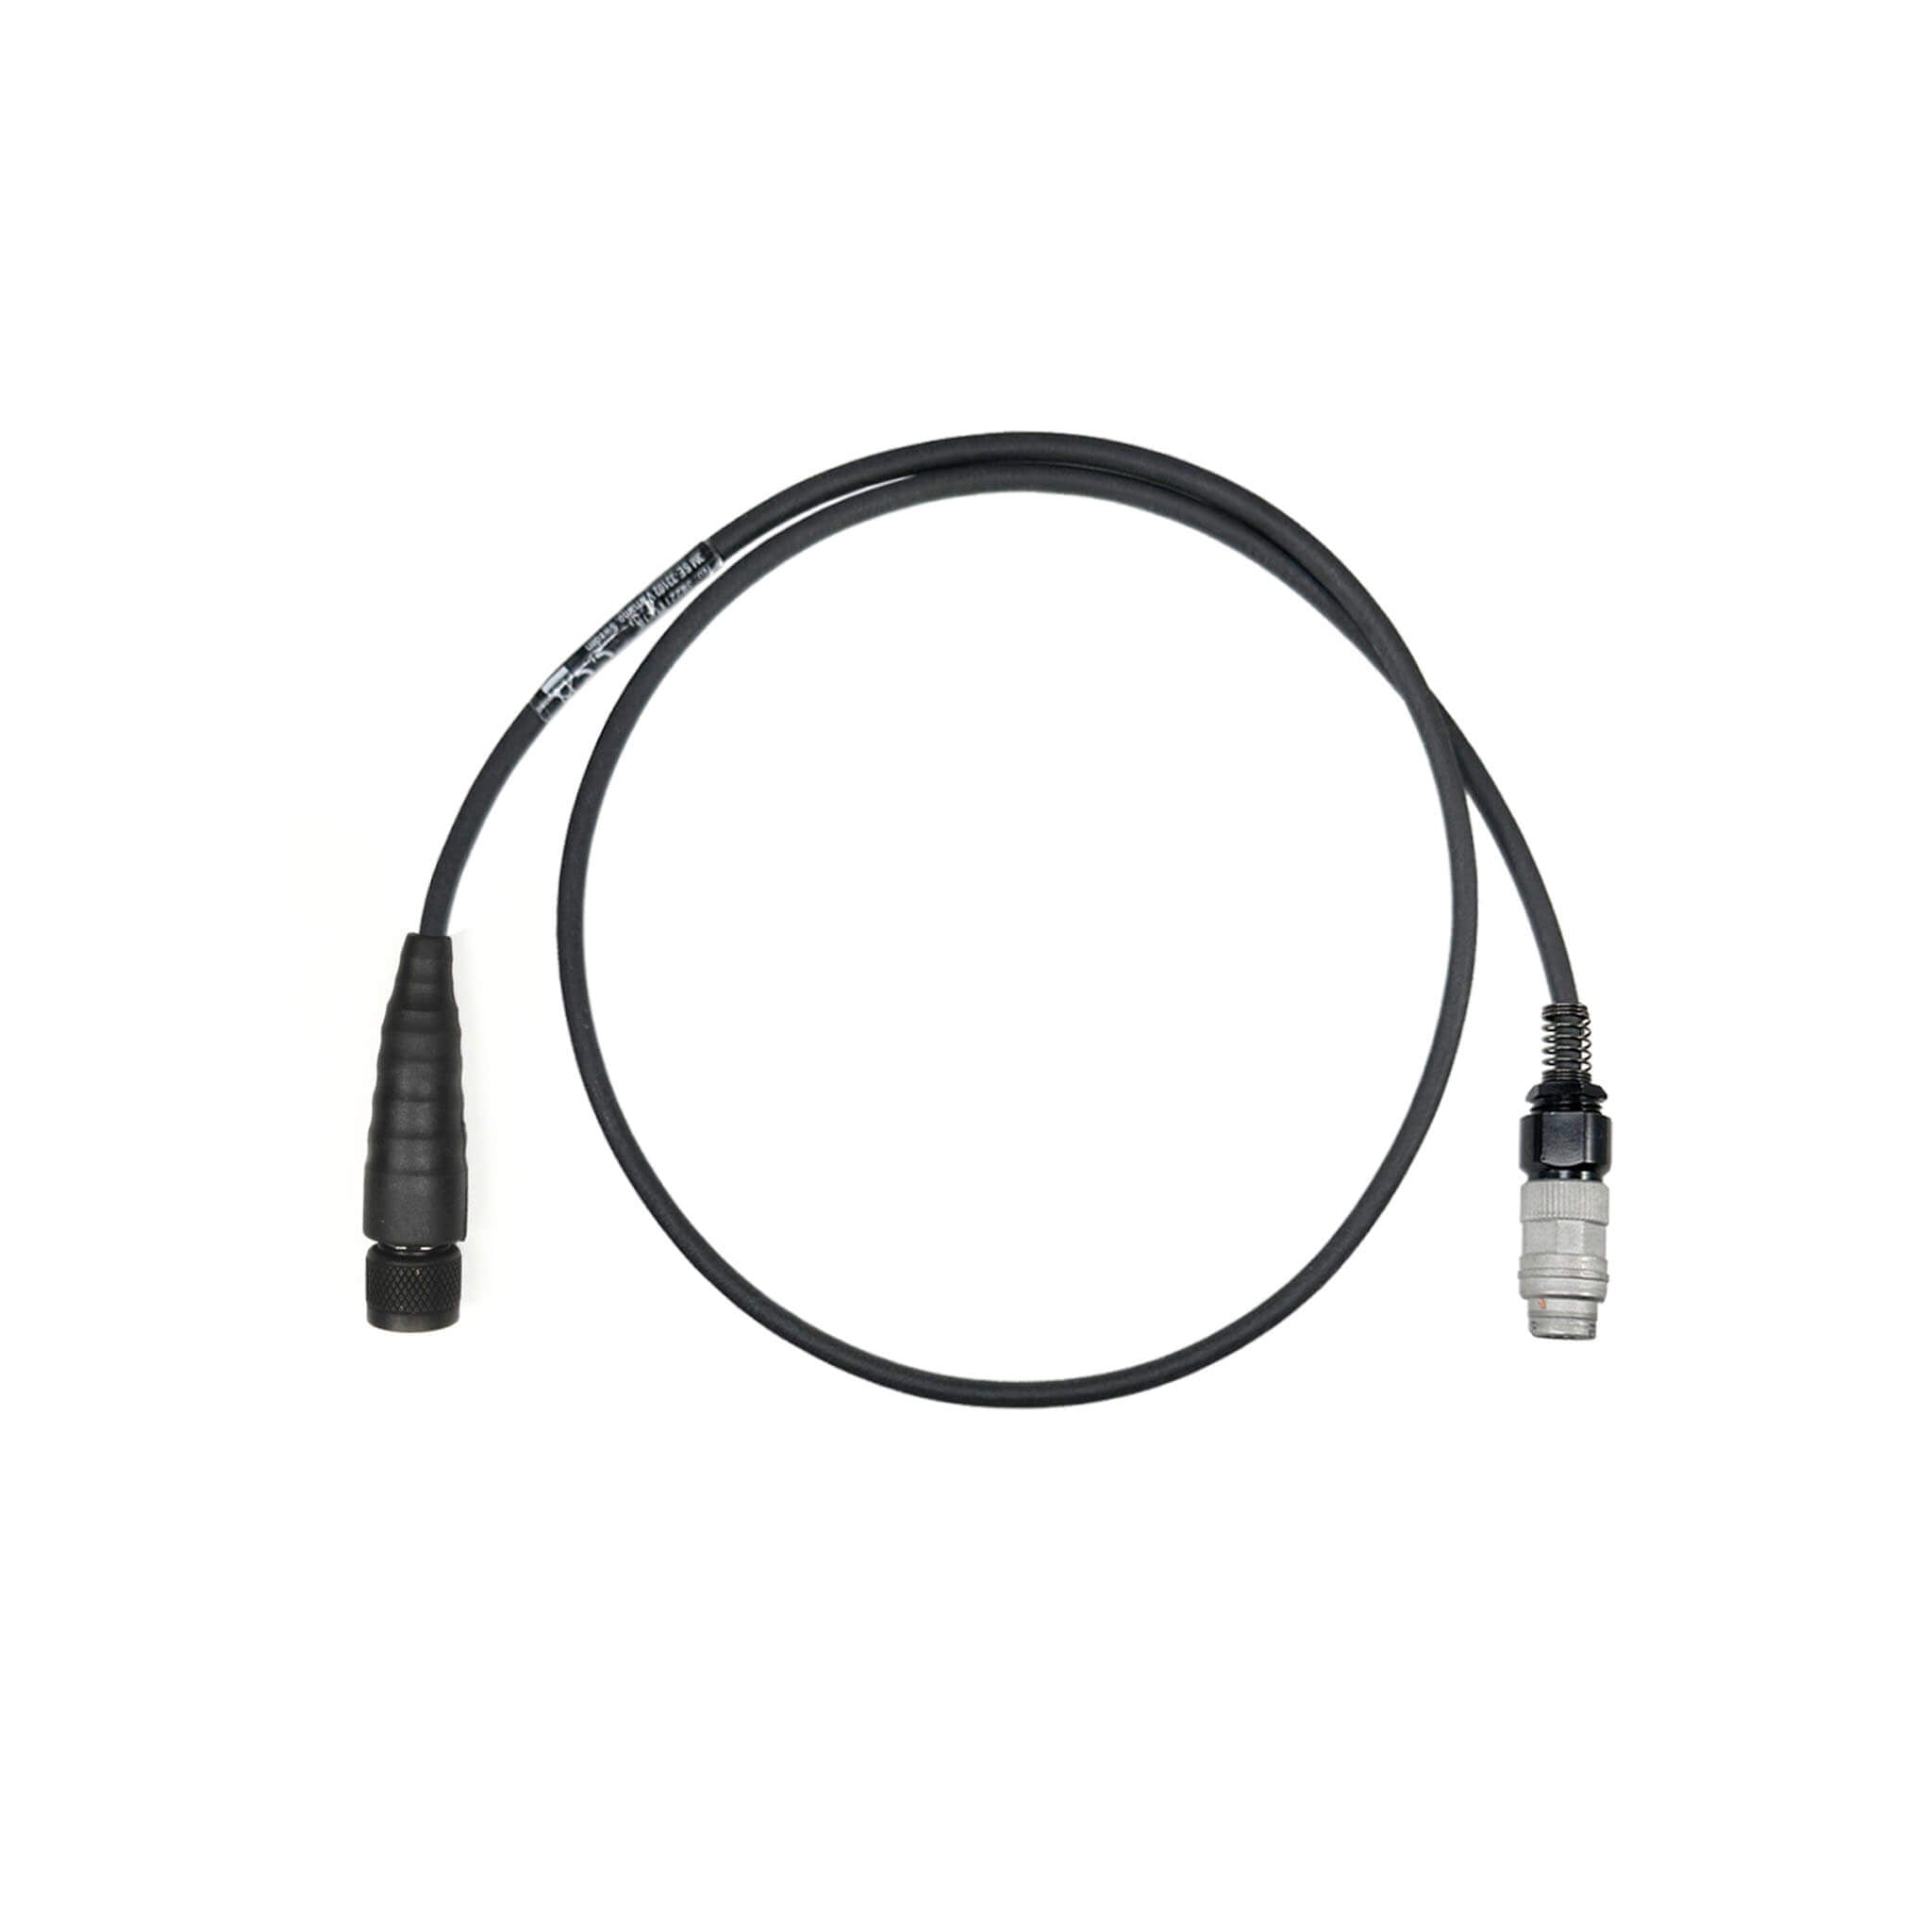 3M Peltor SCU-300 Comms Cable for: Harris/Thales Maritime MBITR PRC117/152  10 Pin Radio Connector